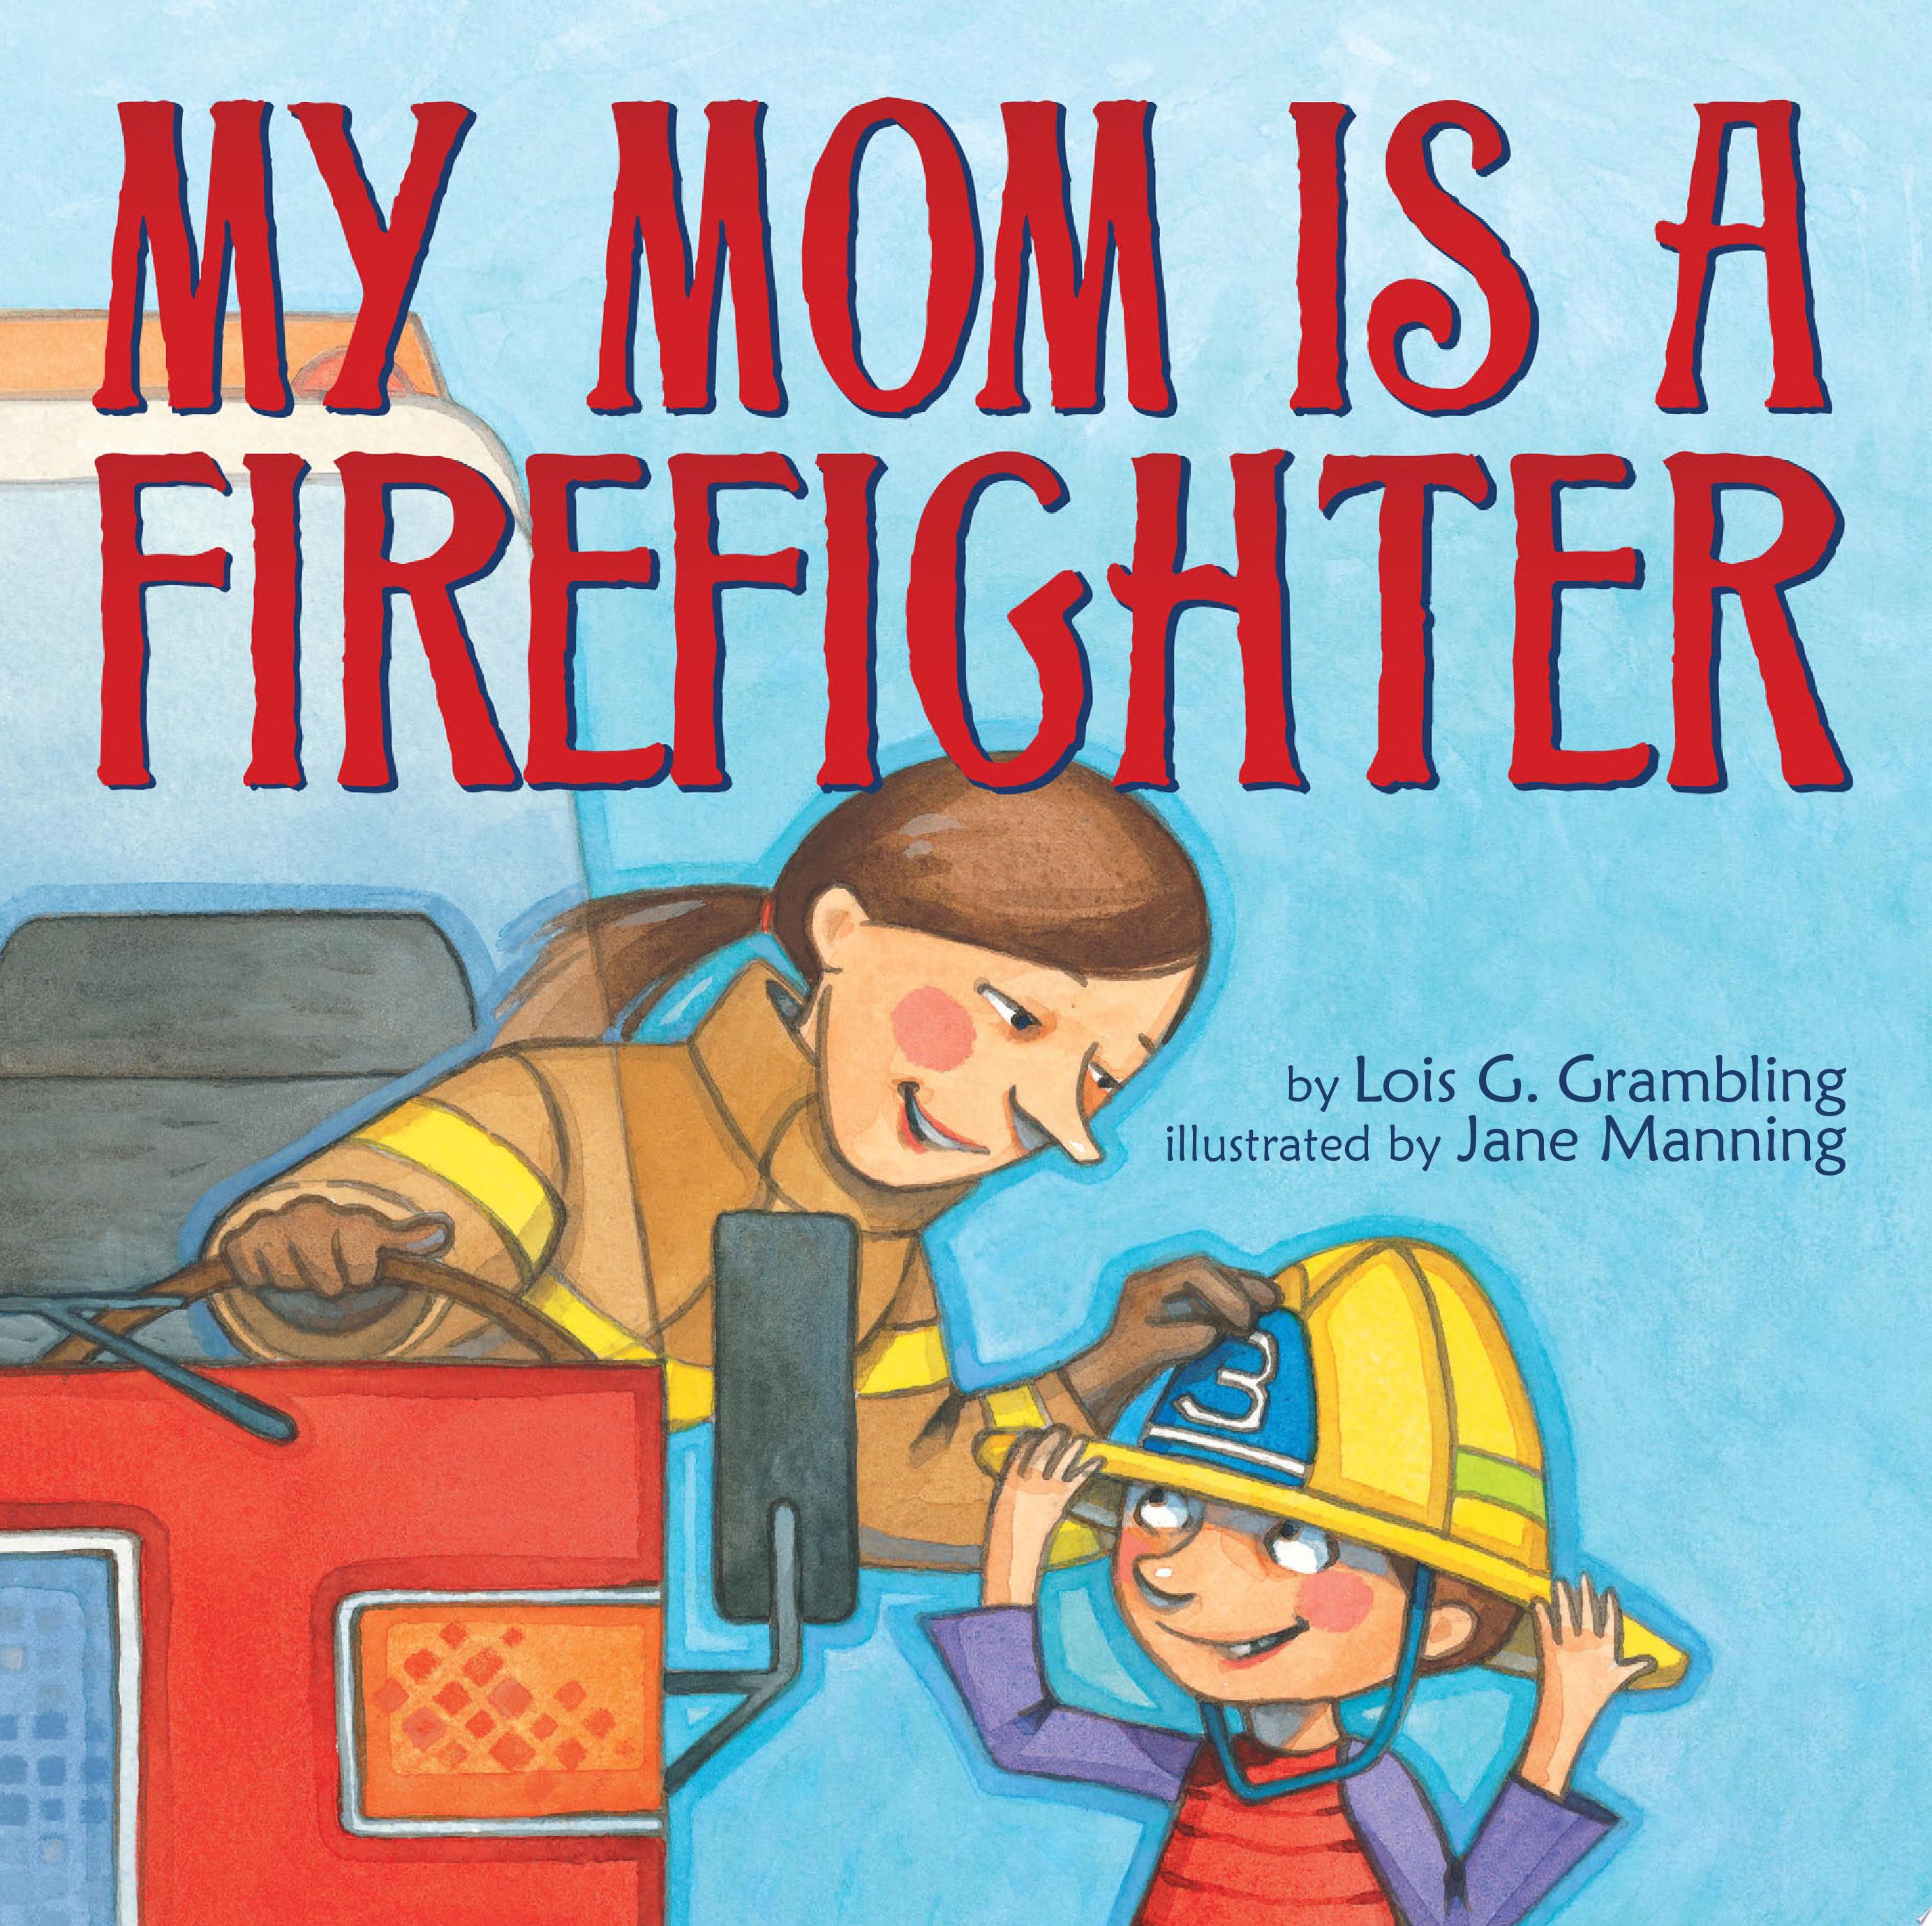 Image for "My Mom Is a Firefighter"